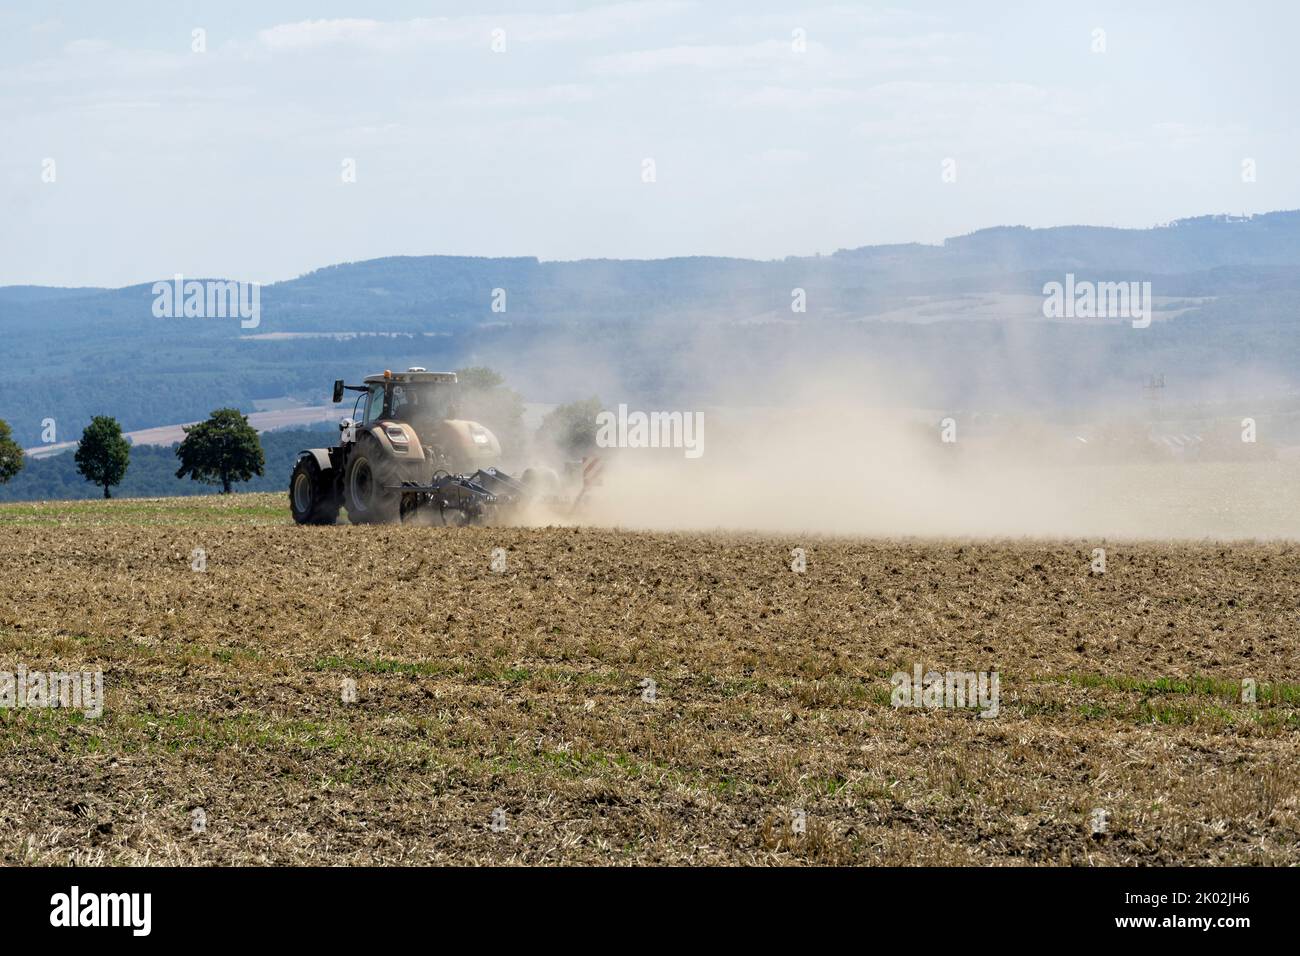 Tractor with plow on a dry field in Germany in the state of Hesse Stock Photo